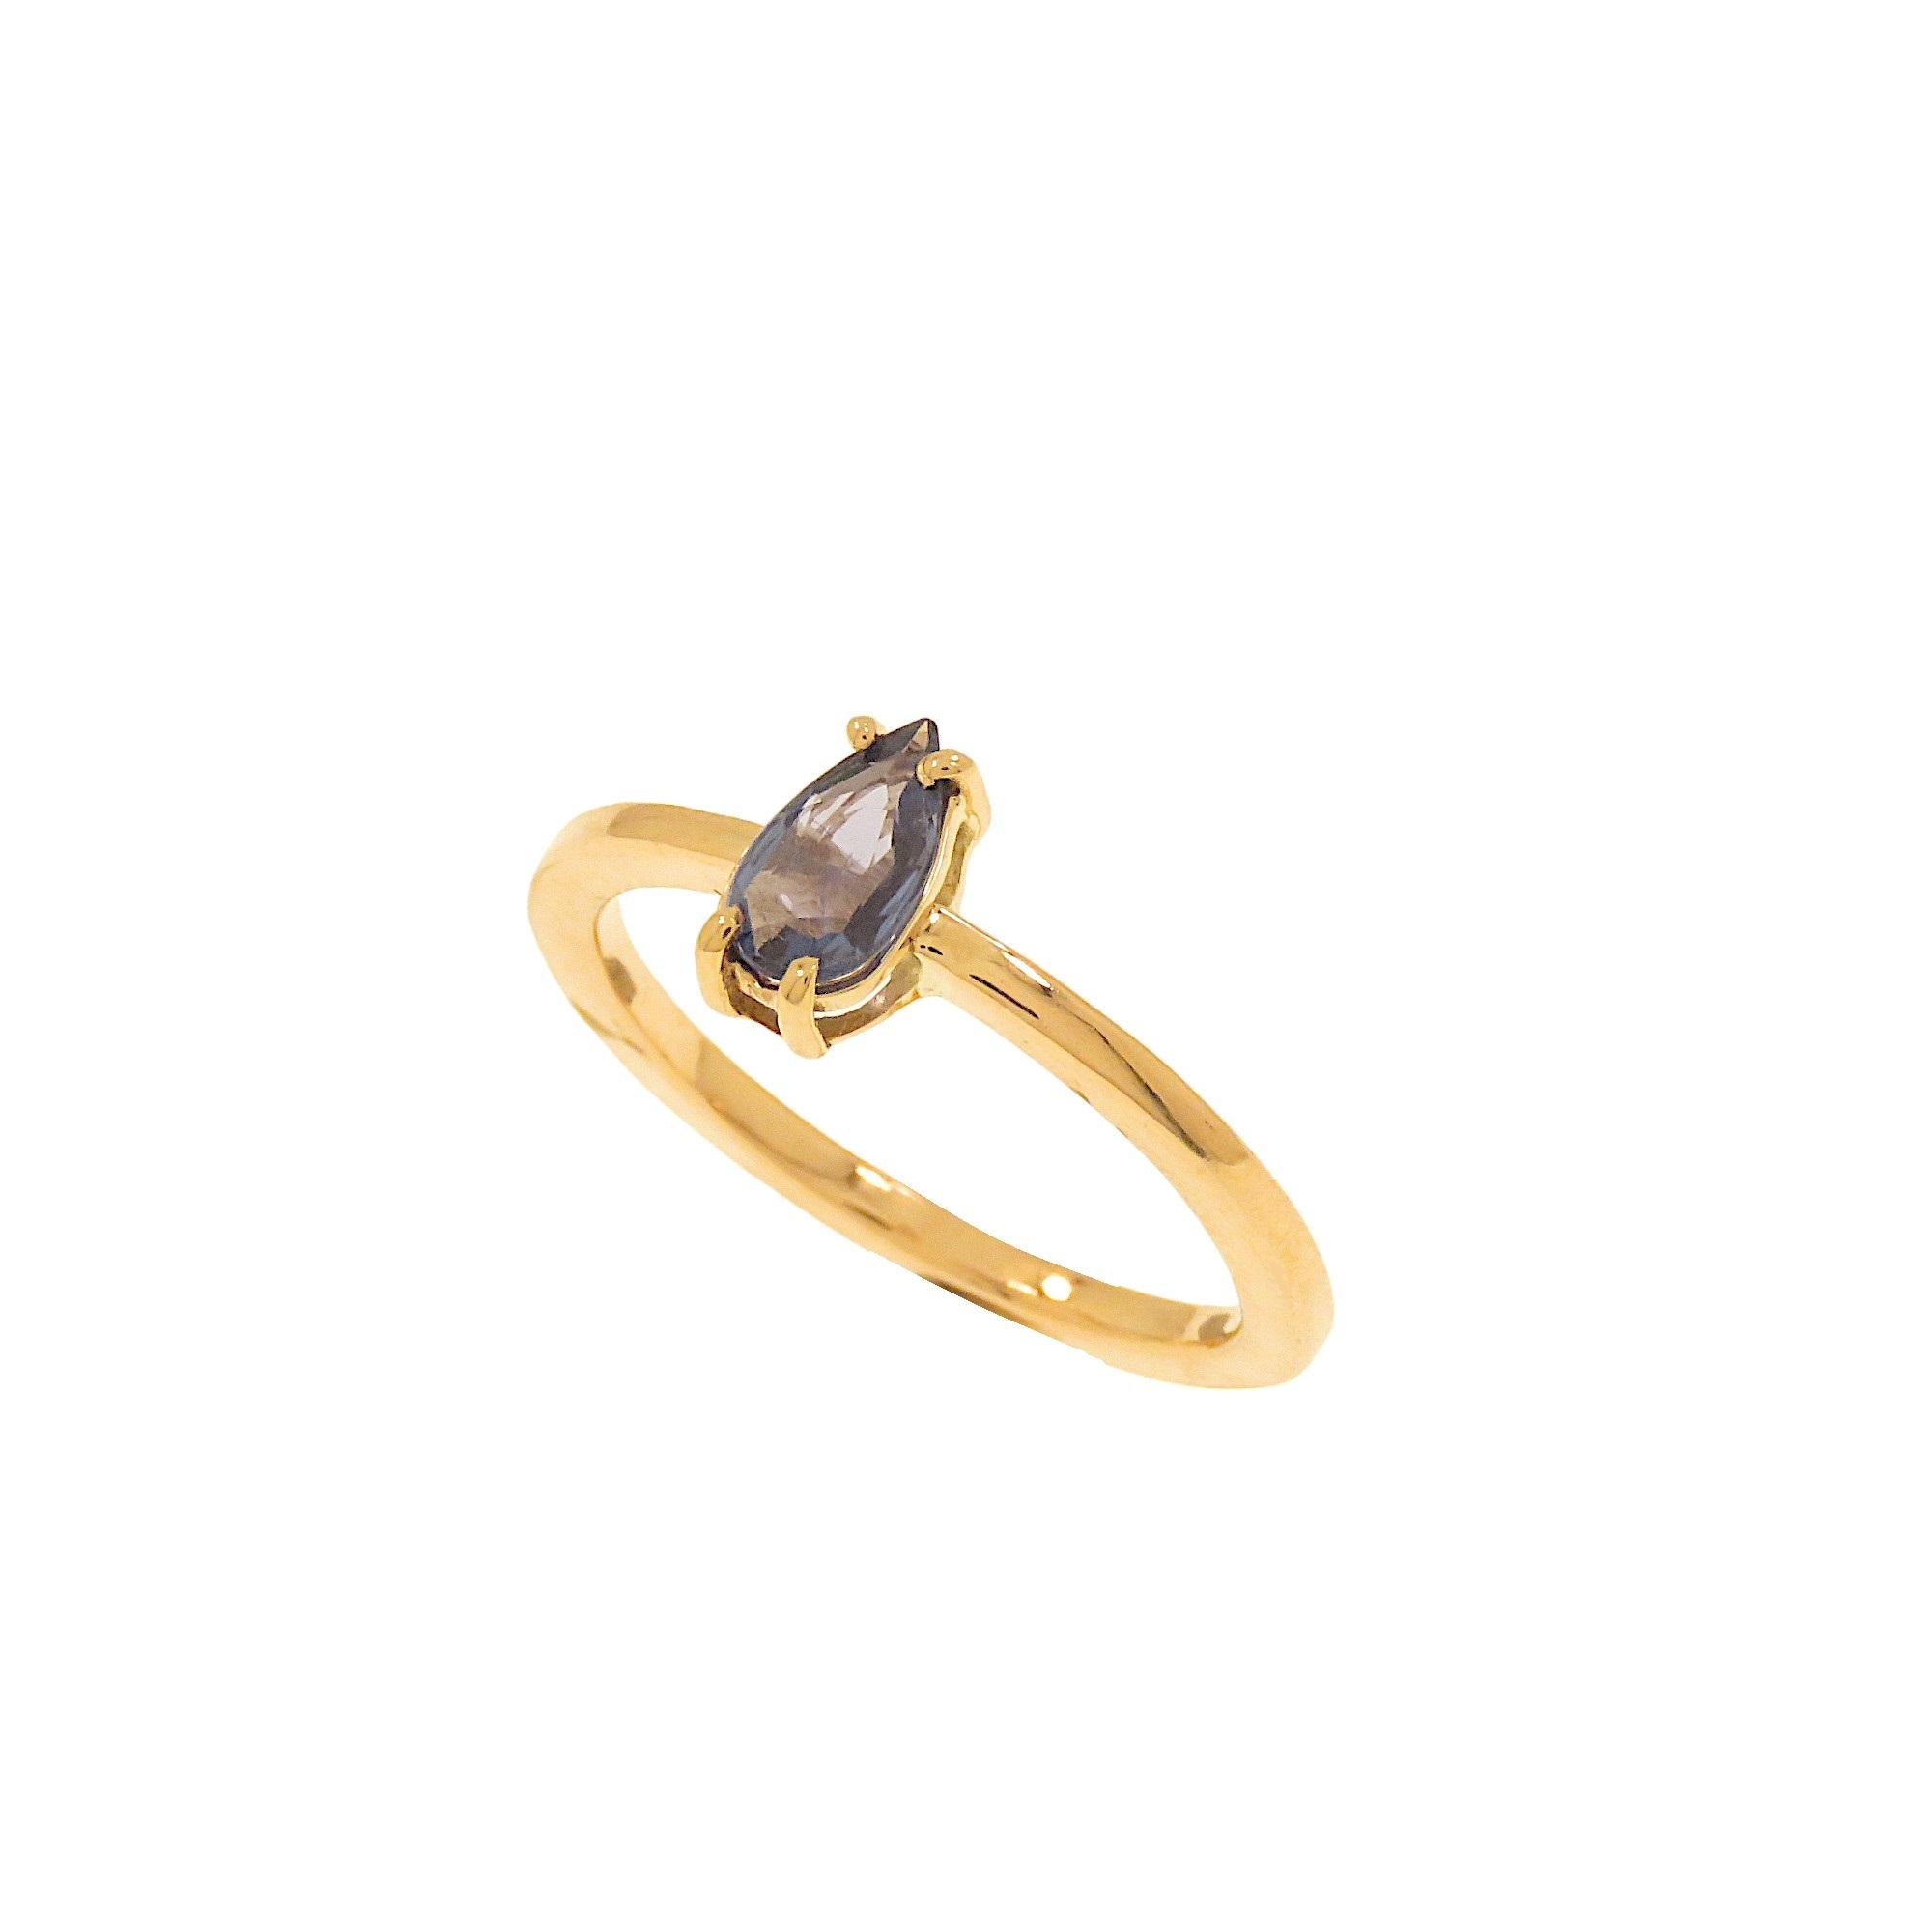 Elegant ring with drop-cut blue sapphire mounted on 9k rose gold jaw bezel. The ring is also ideal for an engagement gift. The jewelry was made entirely by hand in our workshop in Milan. The teardrop-cut blue sapphire weighs 0.45 carat. Ring size: